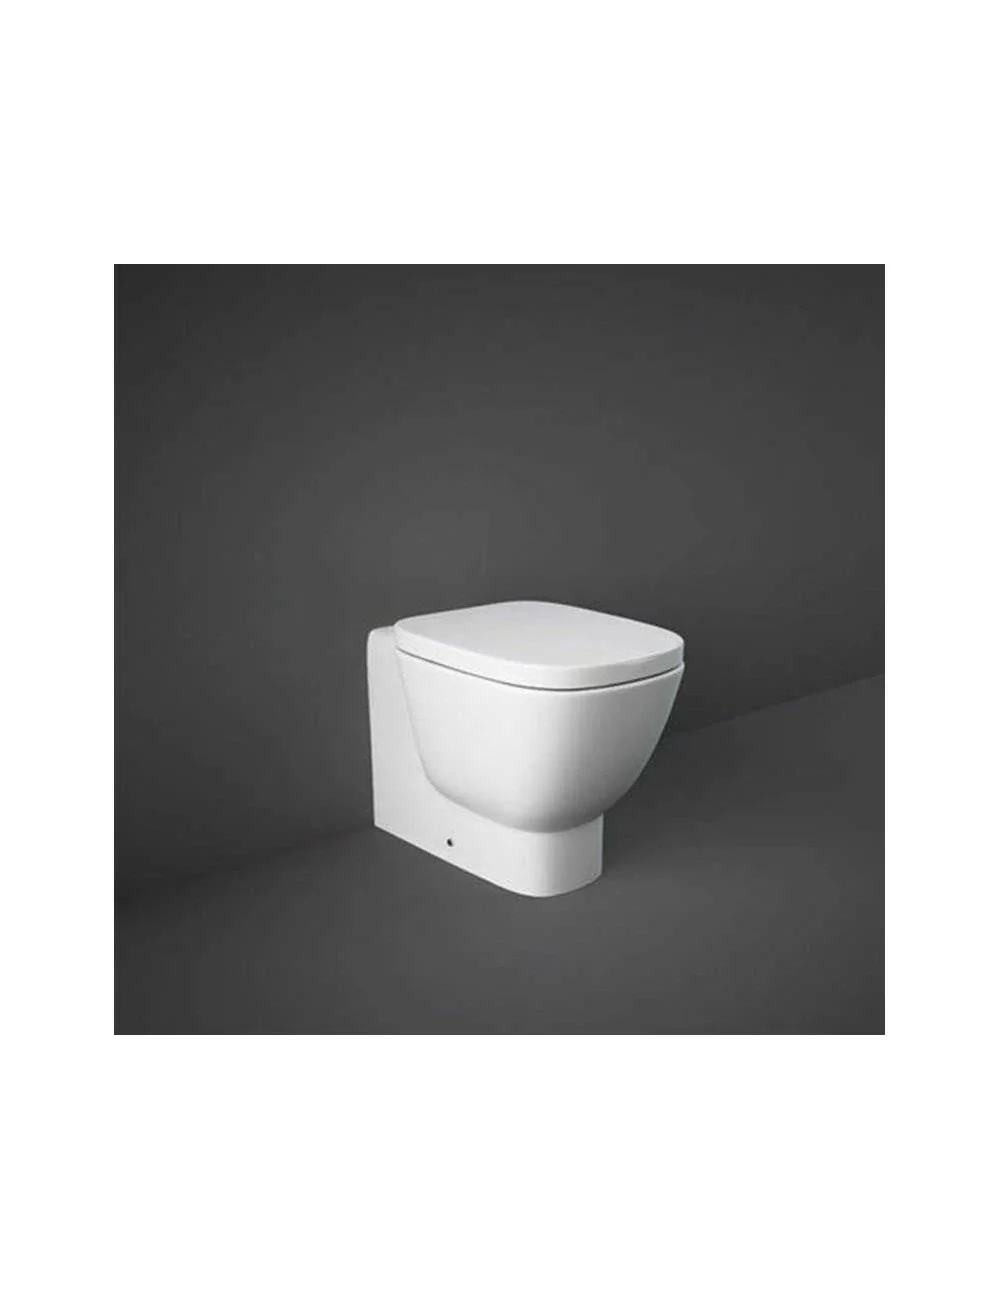 Floor-standing WC flush with wall from the One Rak Ceramics range